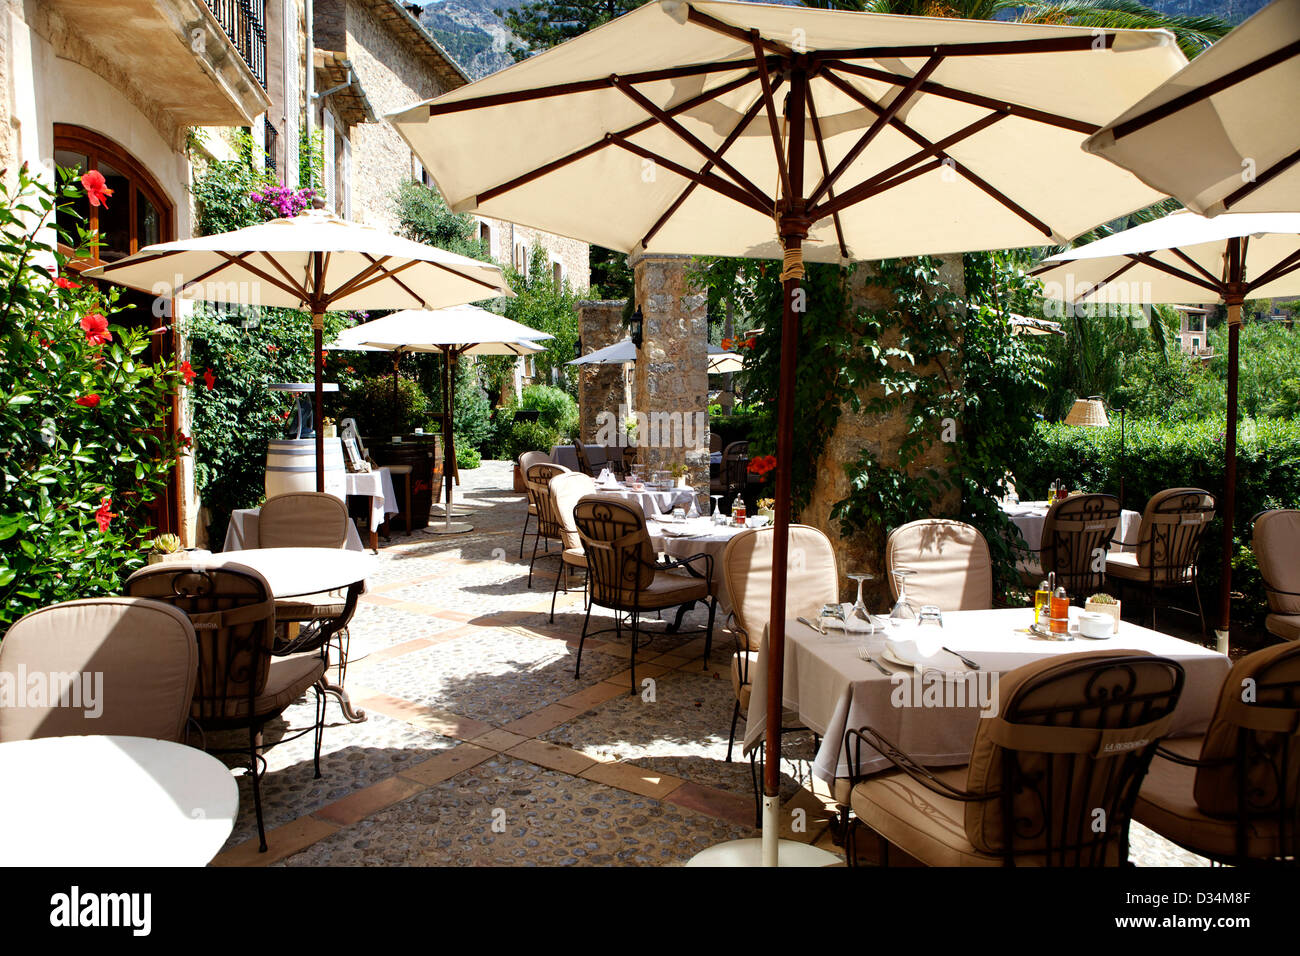 The Belmond La Residencia Hotel on the Balearic Island of Mallorca. One of the leading hotels in the world, often frequented by celebrities. Stock Photo